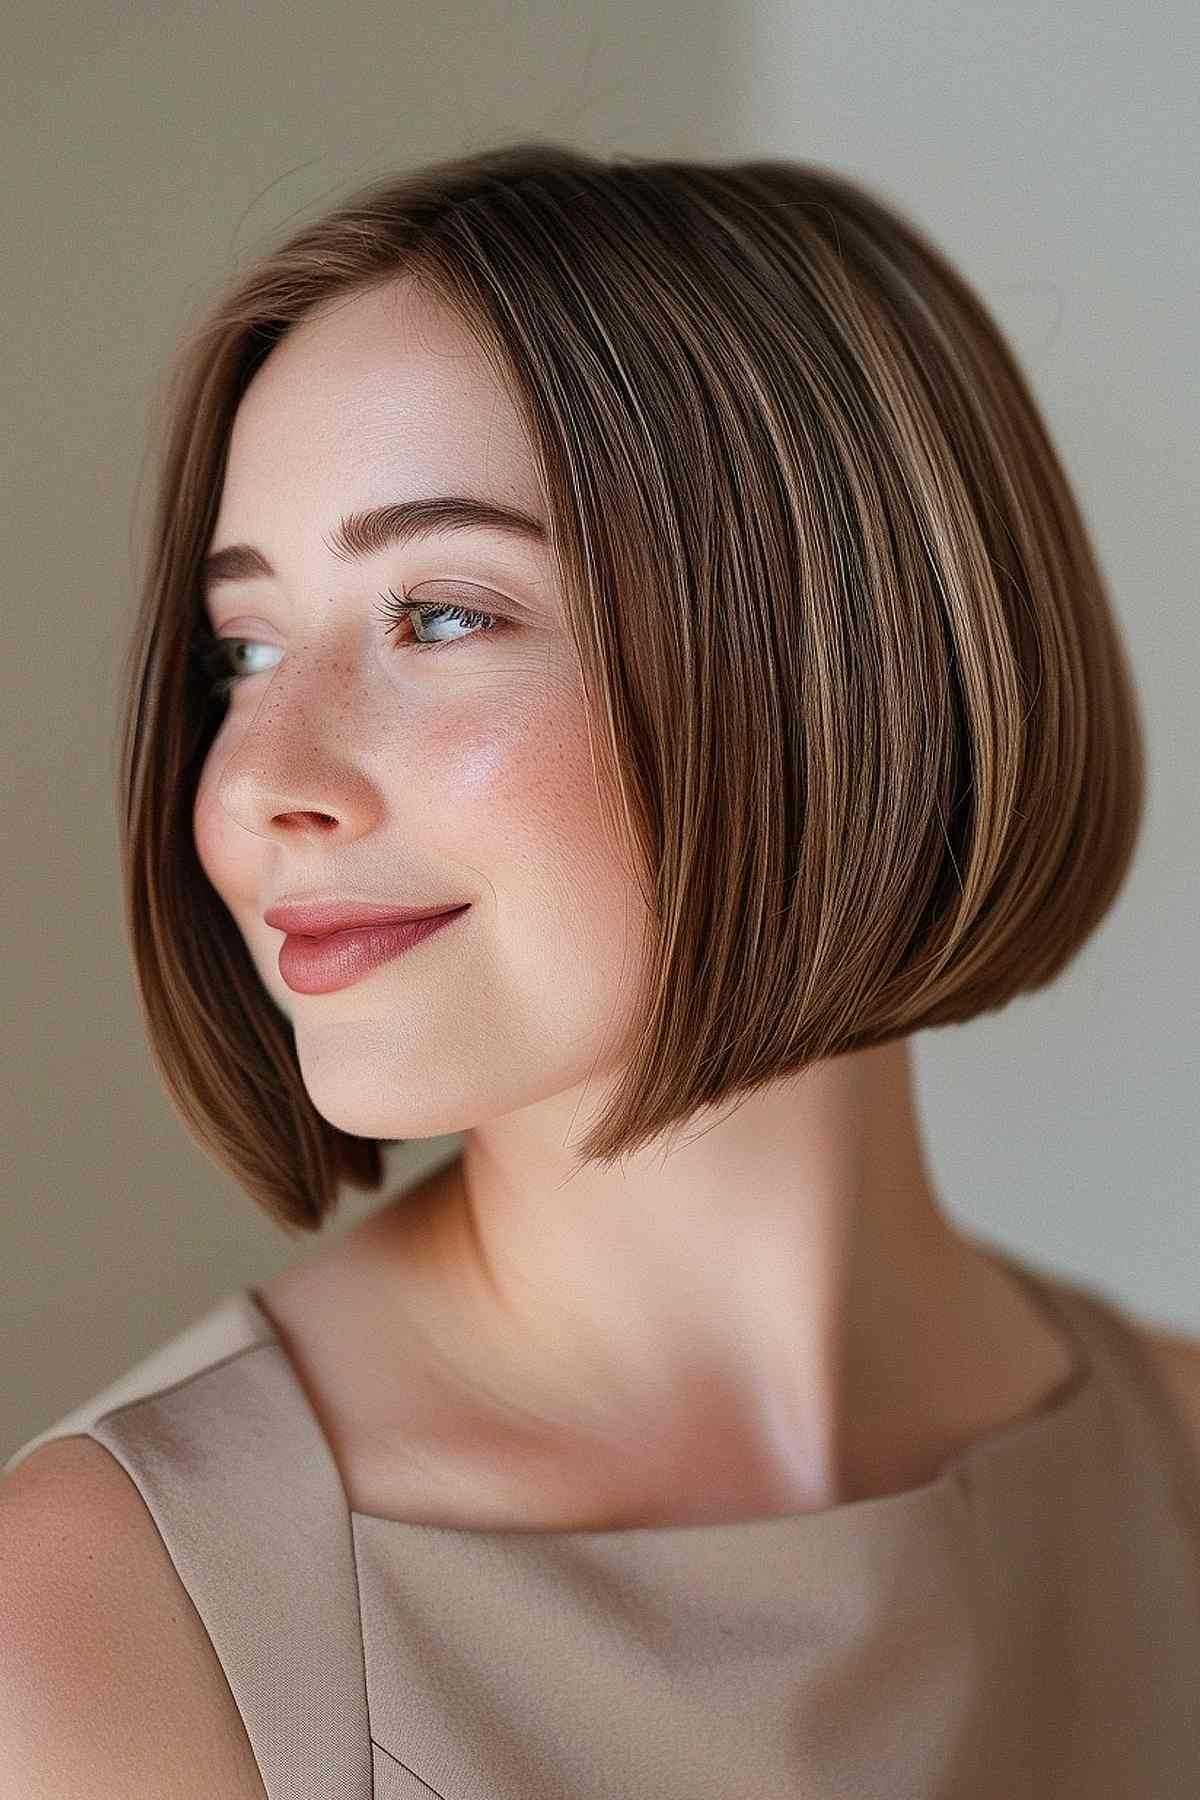 Featuring long front layers and a sleek, straight cut, this A-line chin bob is perfect for round faces.